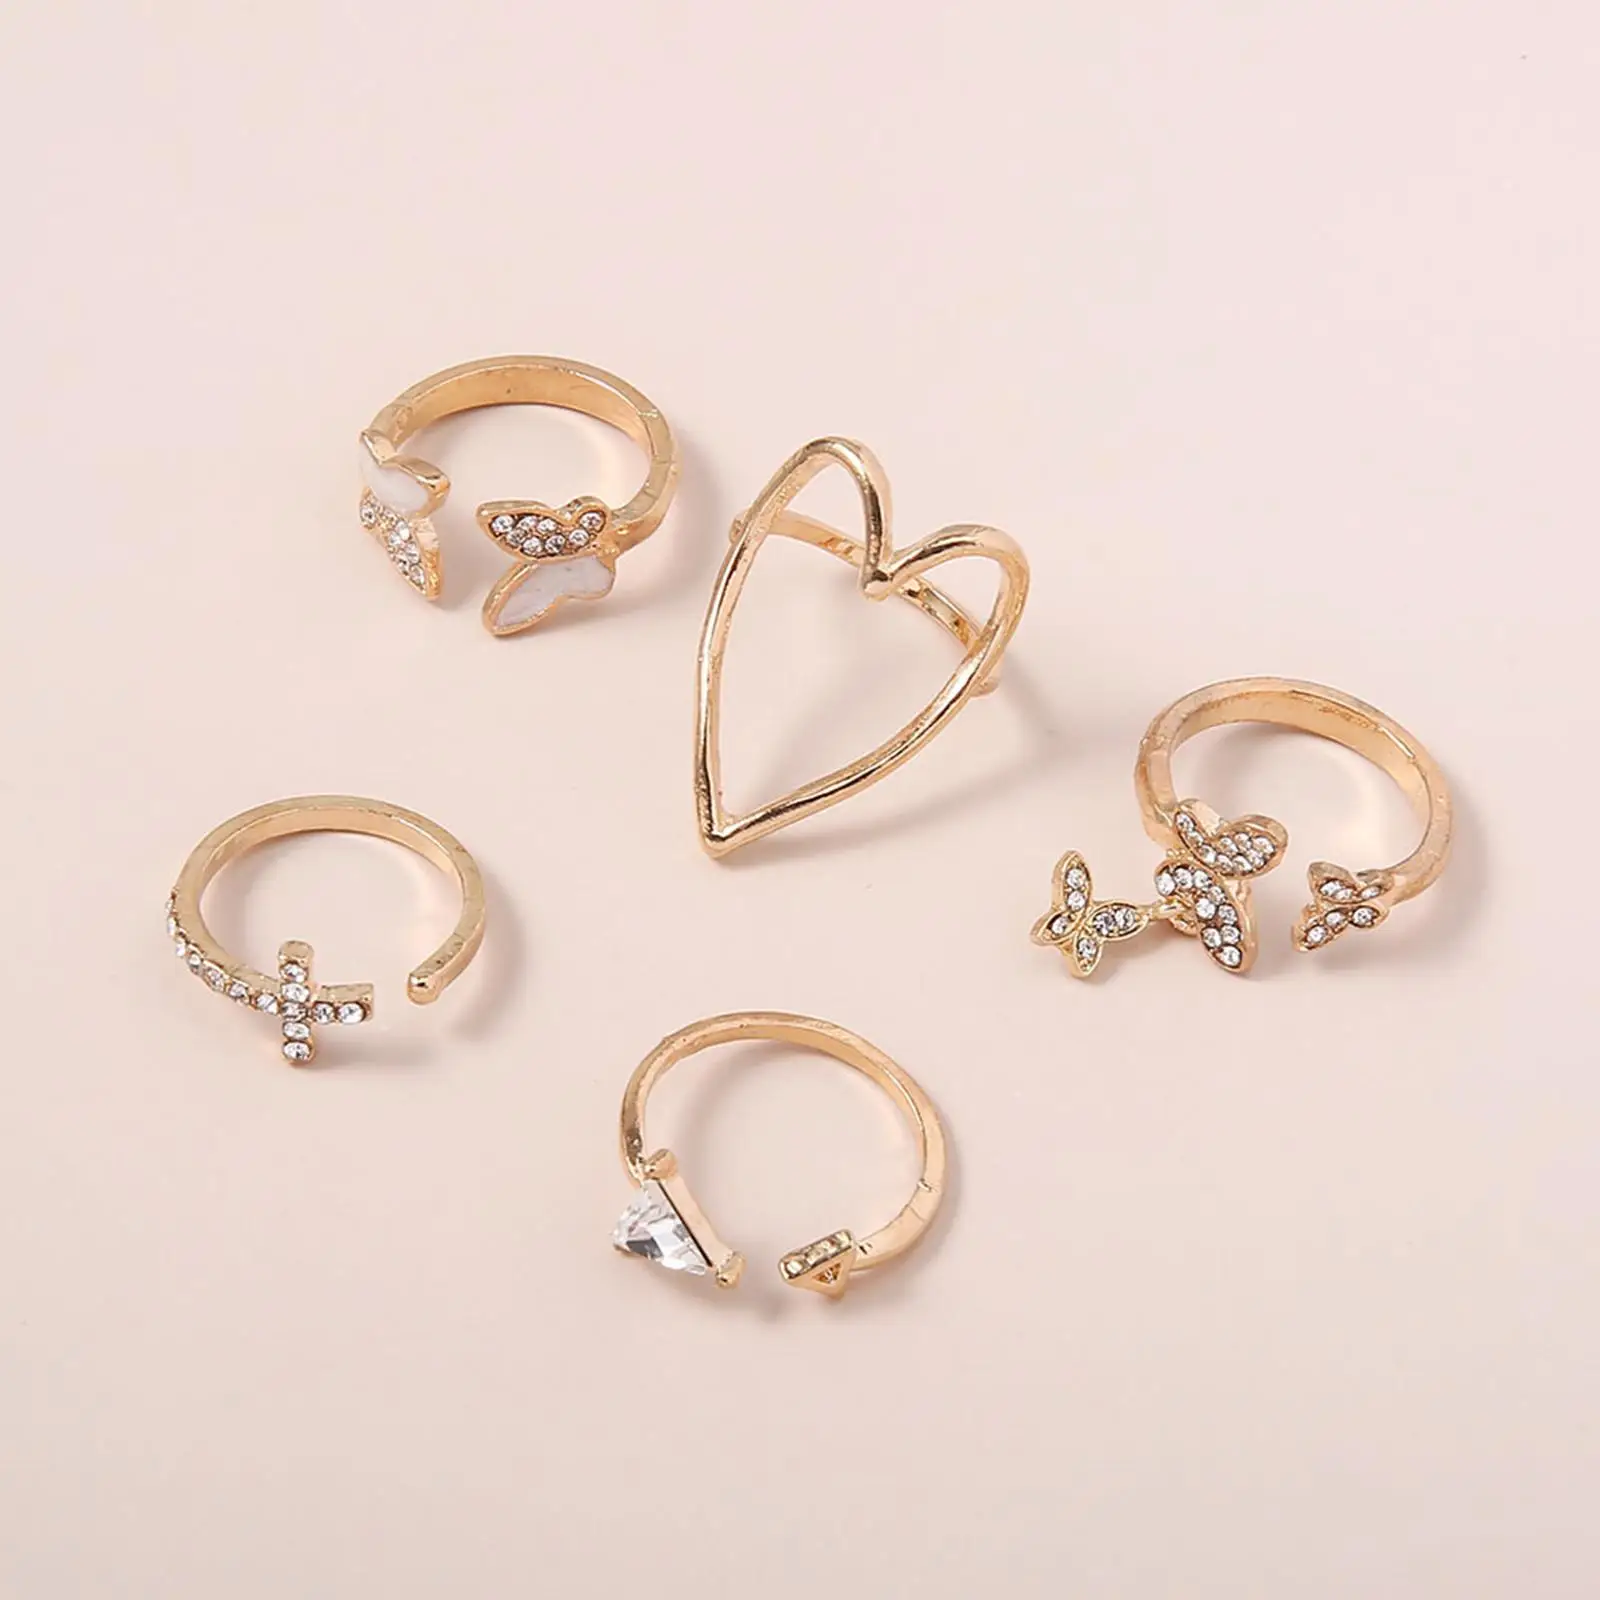 5Pcs/Set Bohemian Knuckle Rings Joint Knot Rings Sets Finger Rings Teen Girls Jewelry Gifts Party Wedding Valentine Day Present